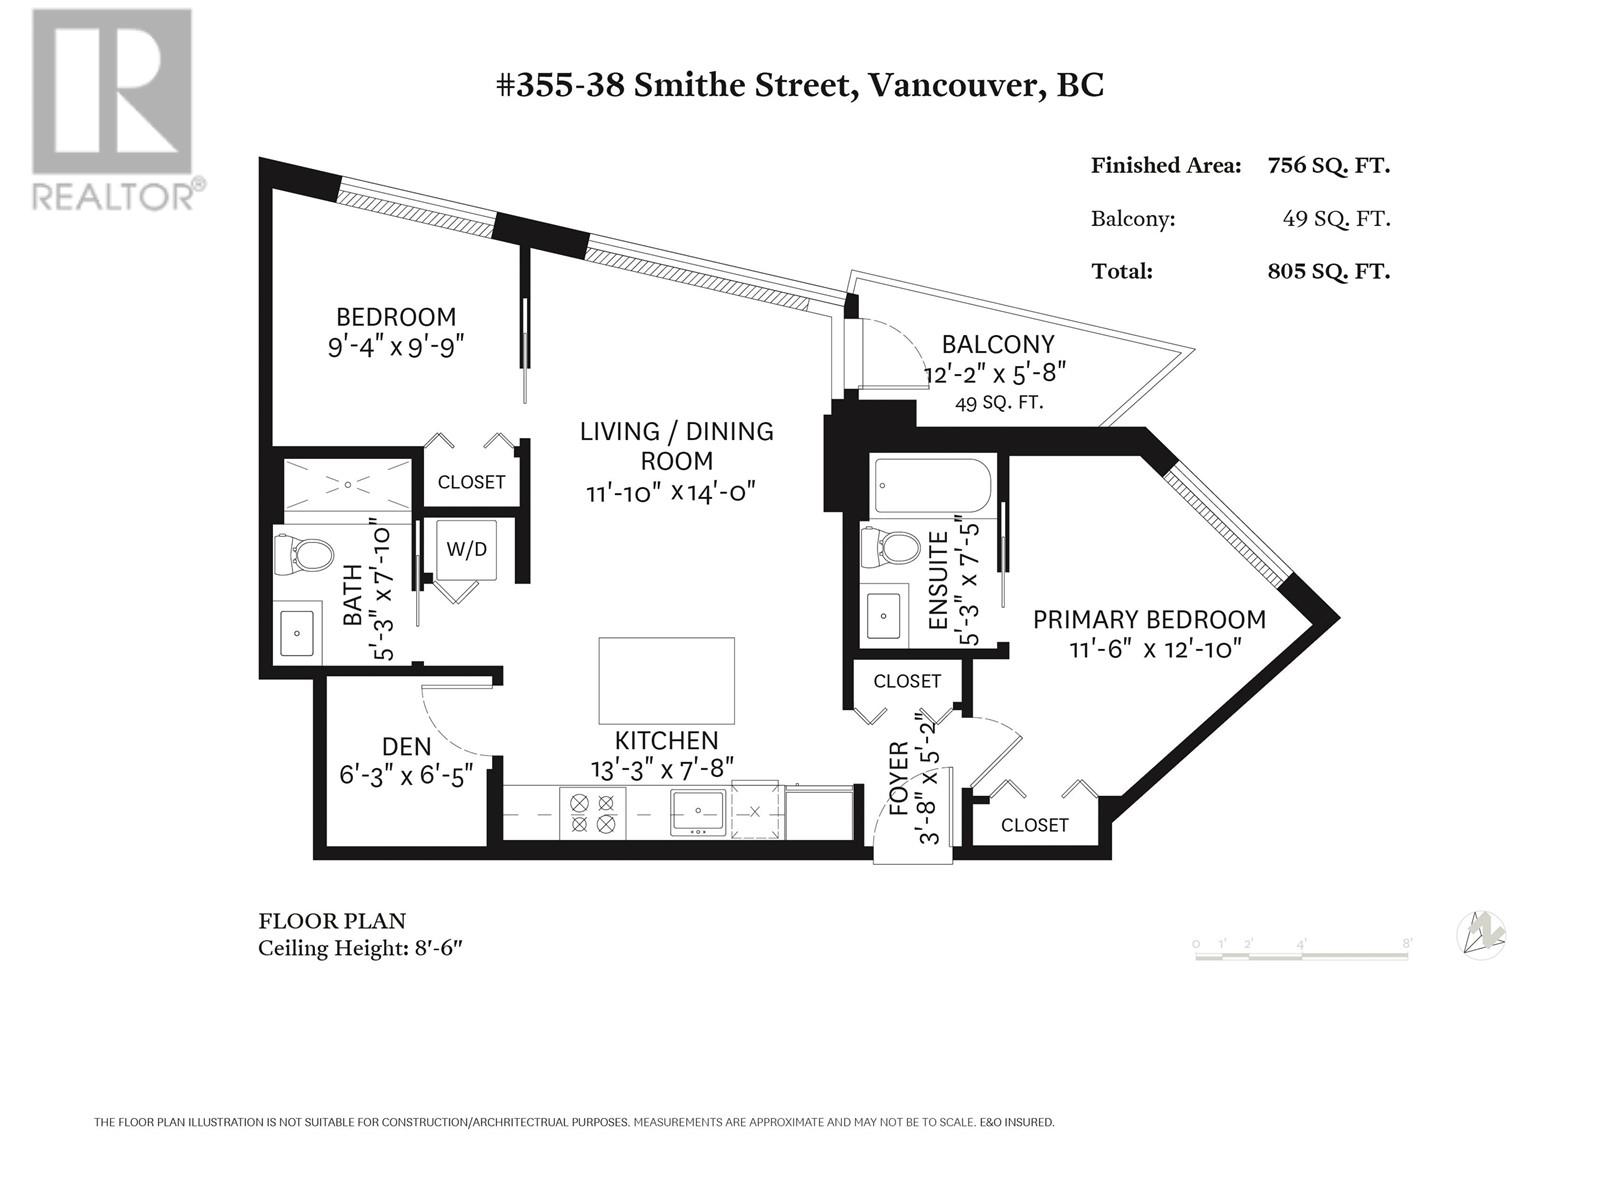 Listing Picture 40 of 40 : 355 38 SMITHE STREET, Vancouver / 溫哥華 - 魯藝地產 Yvonne Lu Group - MLS Medallion Club Member